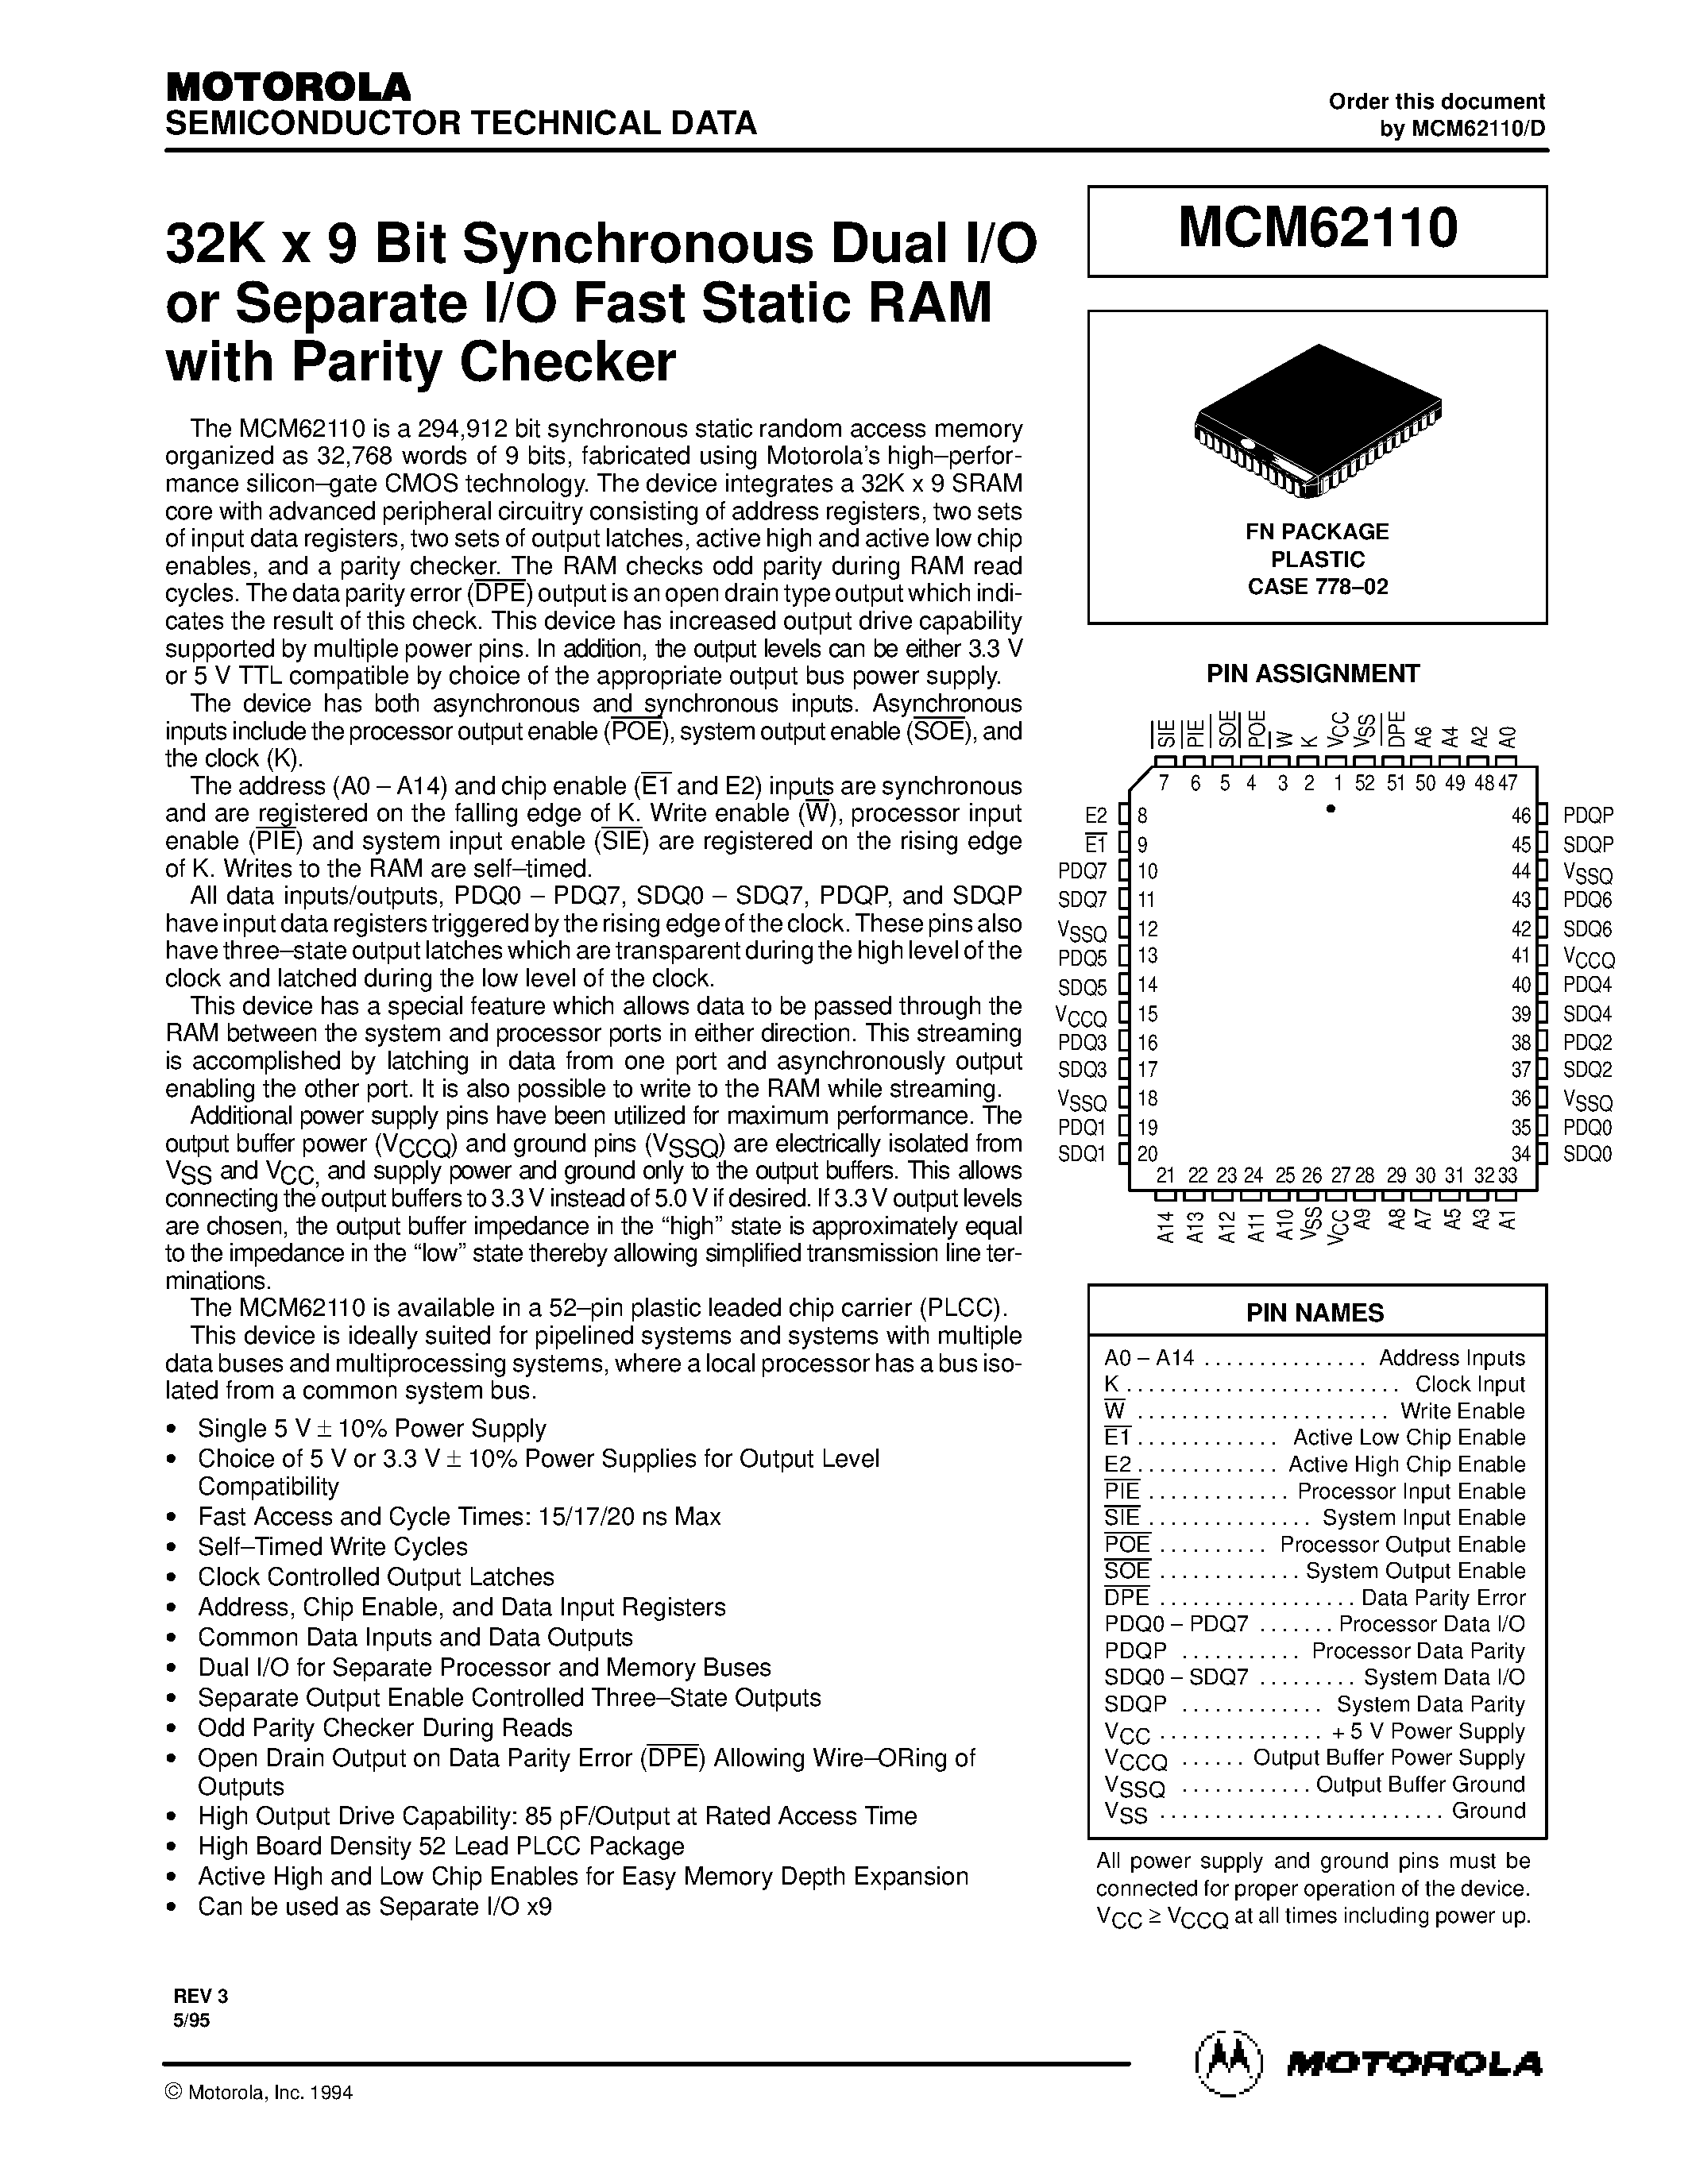 Datasheet MCM62110 - 32K x 9 Bit Synchronous Dual I/O or Separate I/O Fast Static RAM with Parity Checker page 1